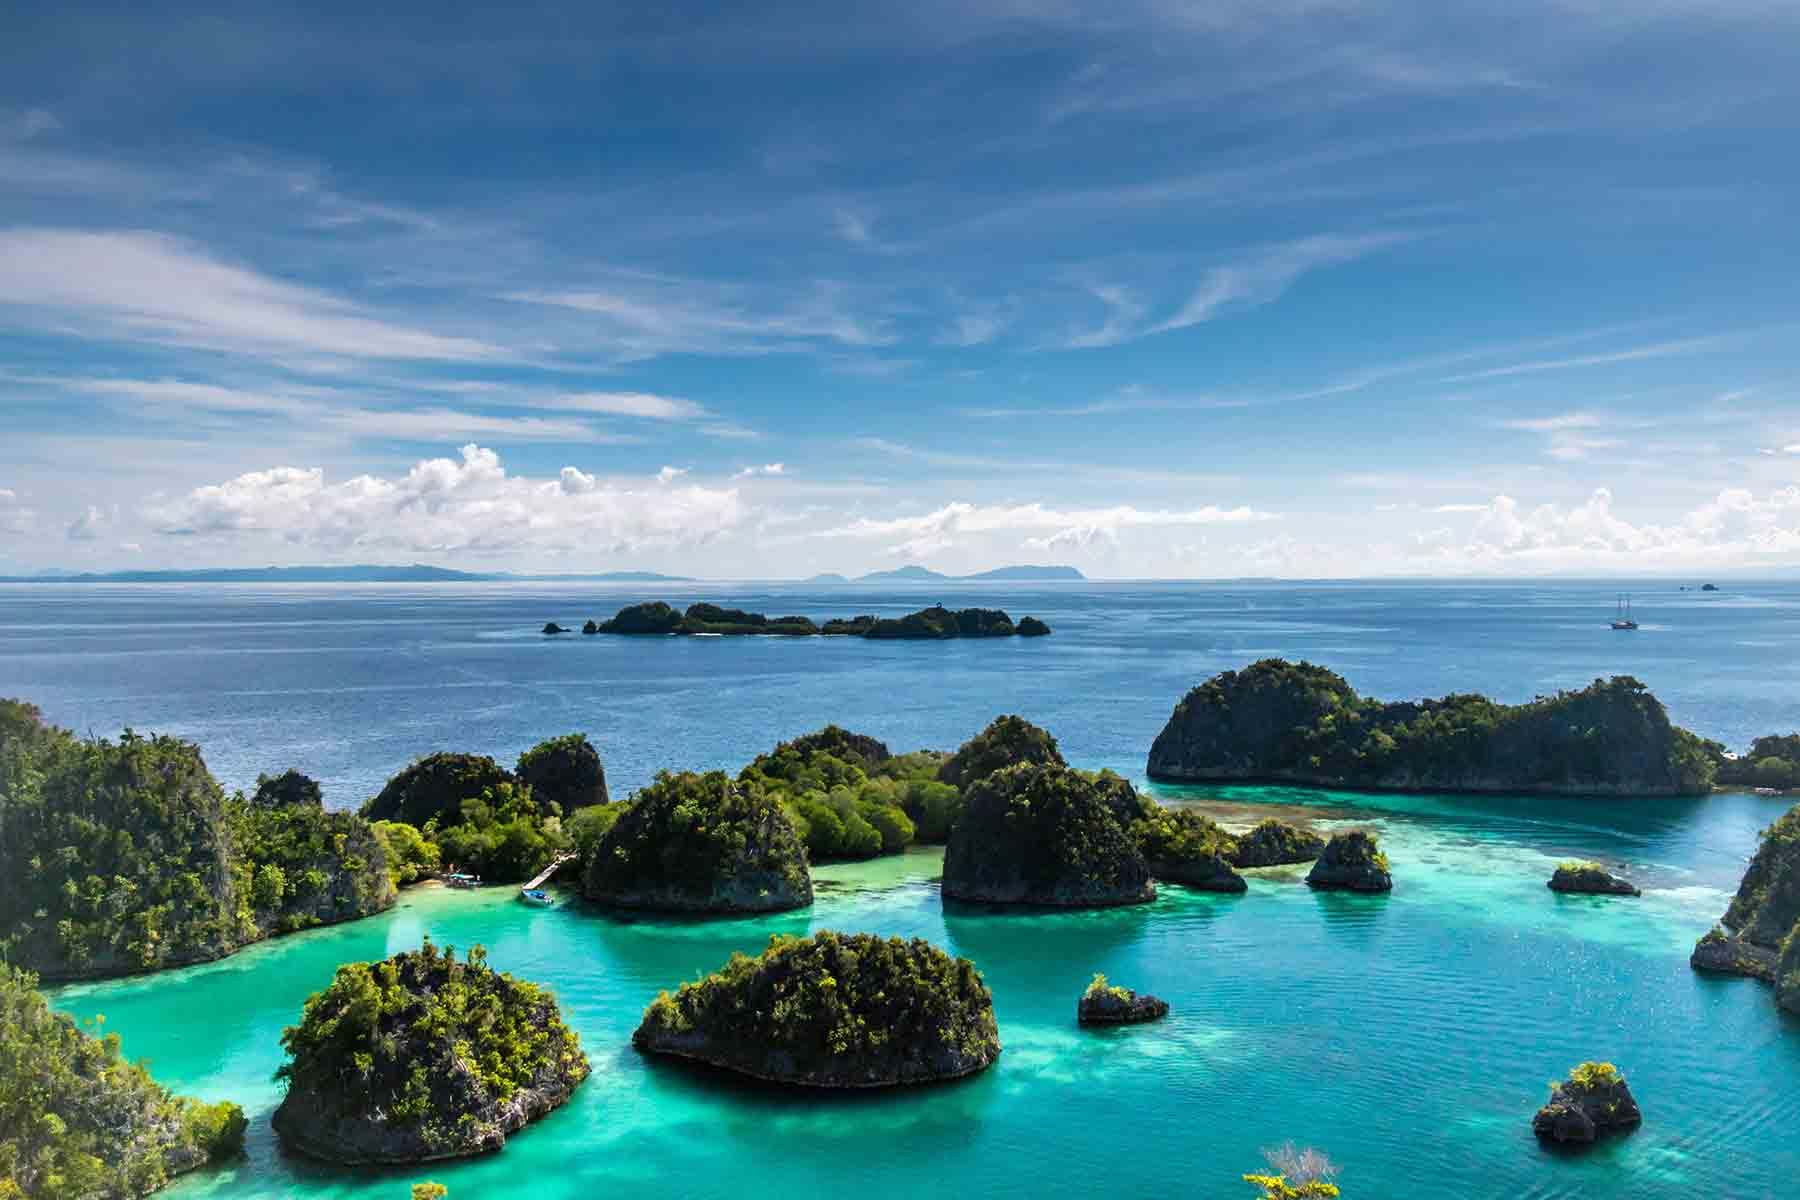 Small green islands in blue water